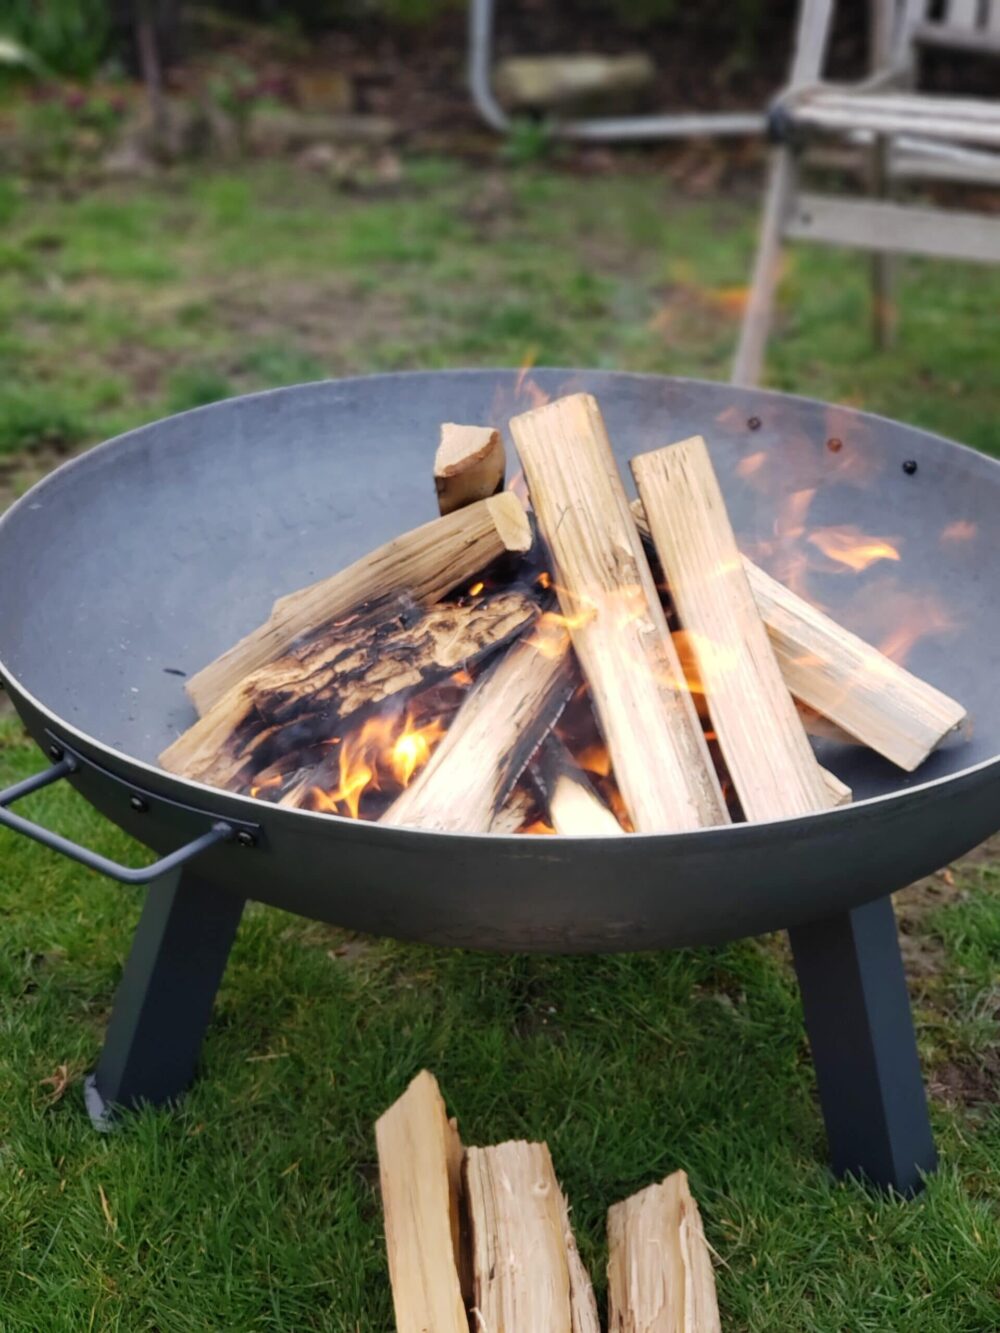 Fire Pit On Grass 5 Best Ways To Prevent Damage To Your Lawn